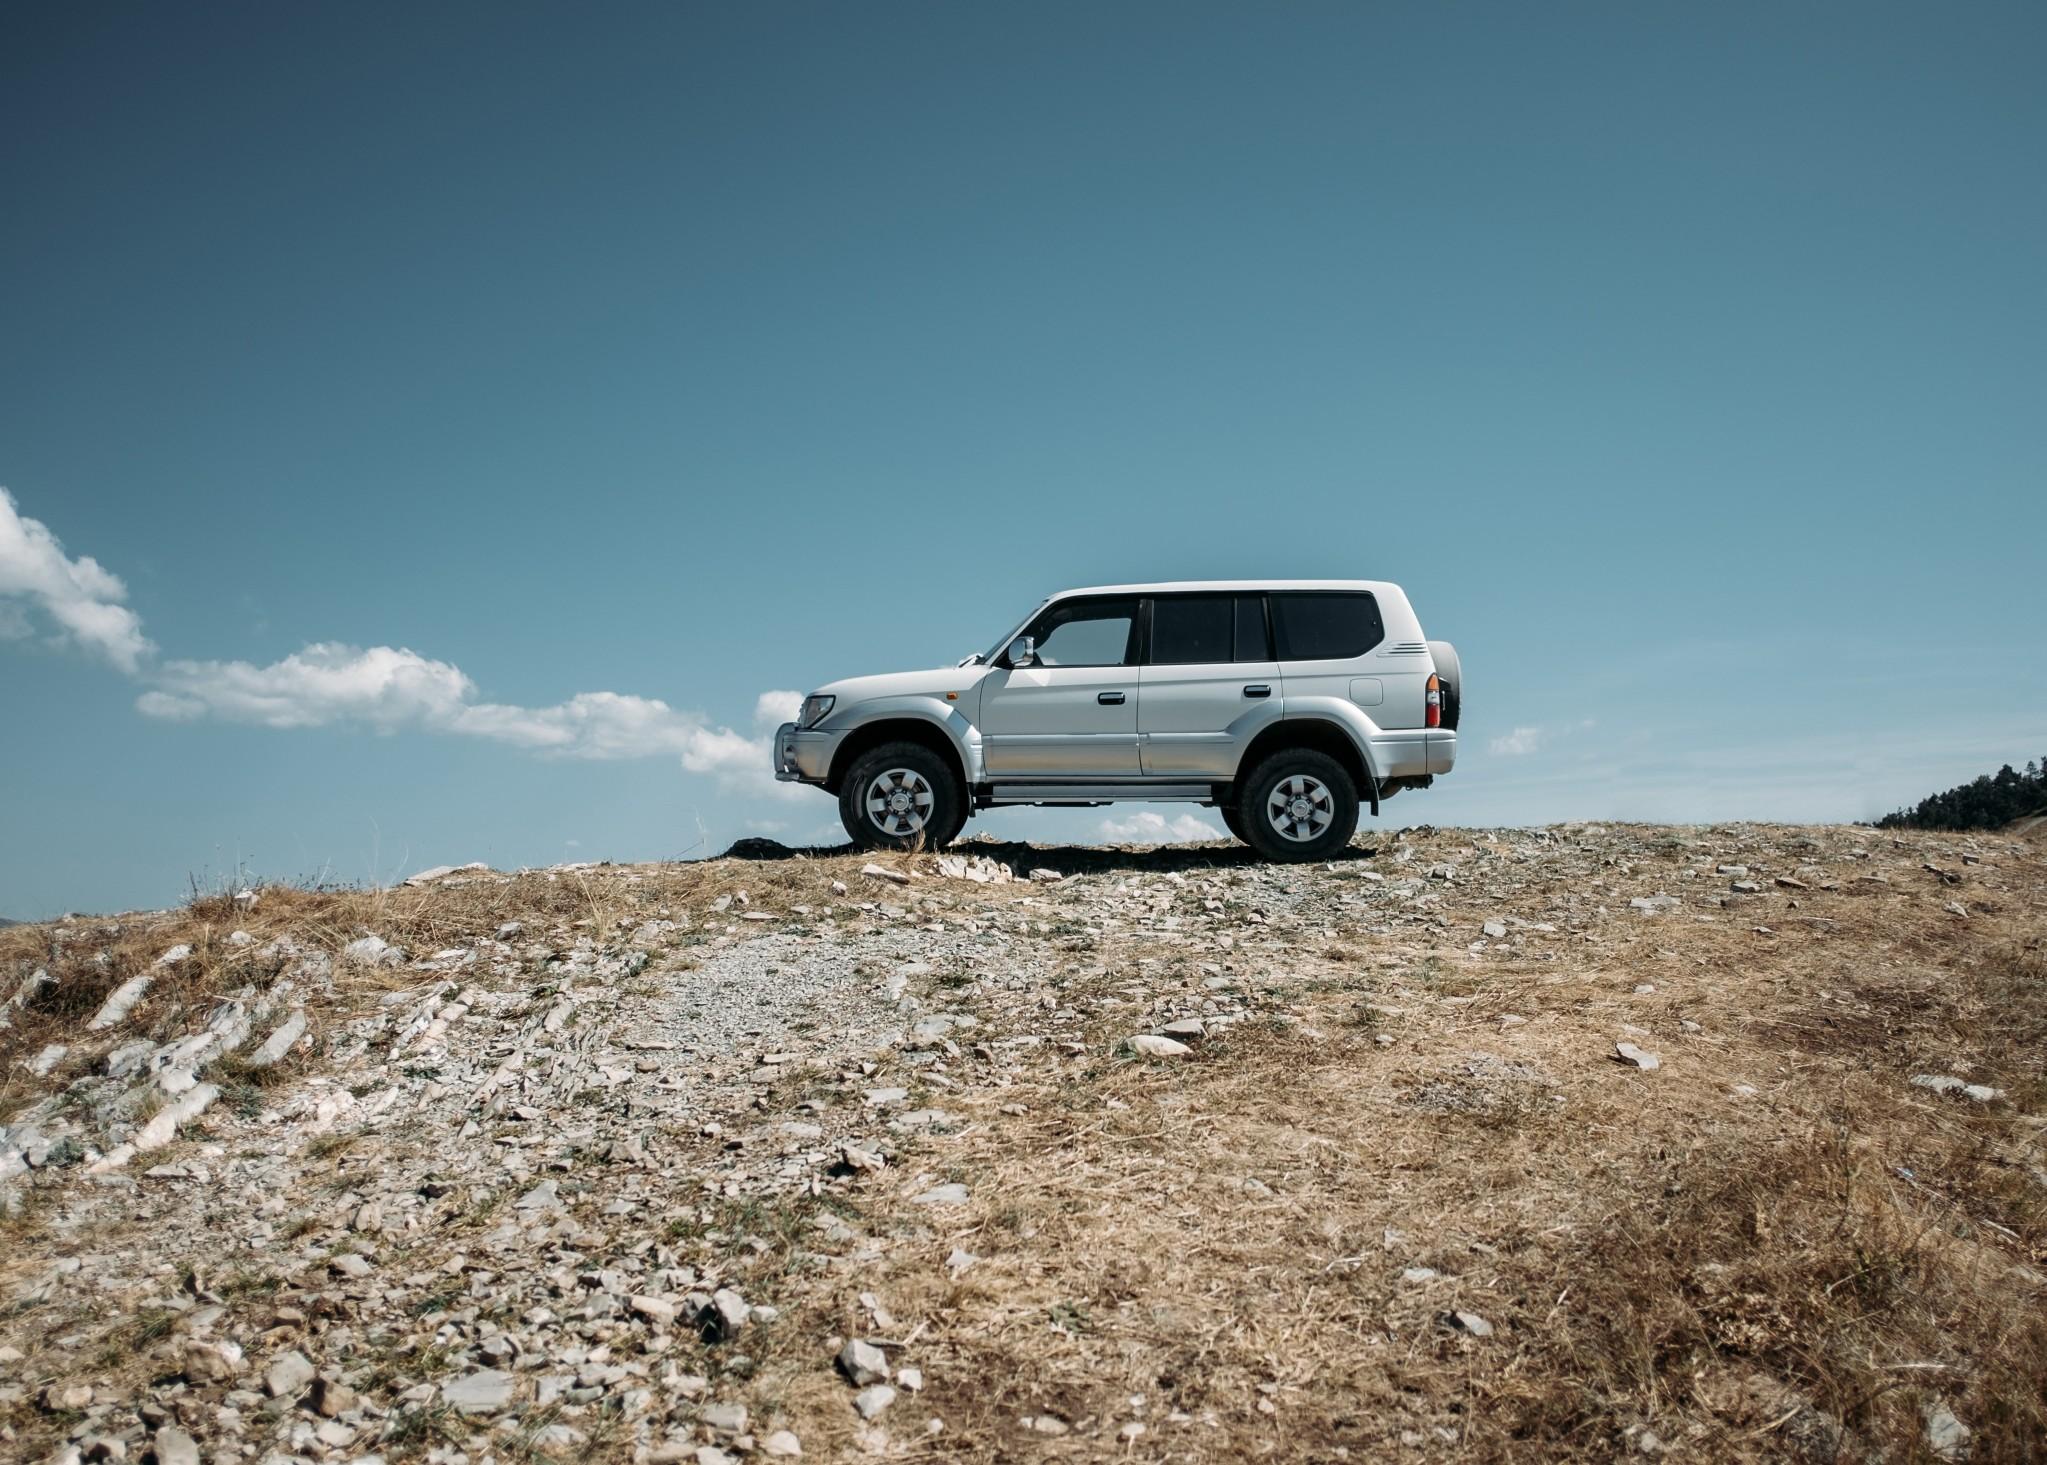 The Land Cruiser is legendary for its reliability.